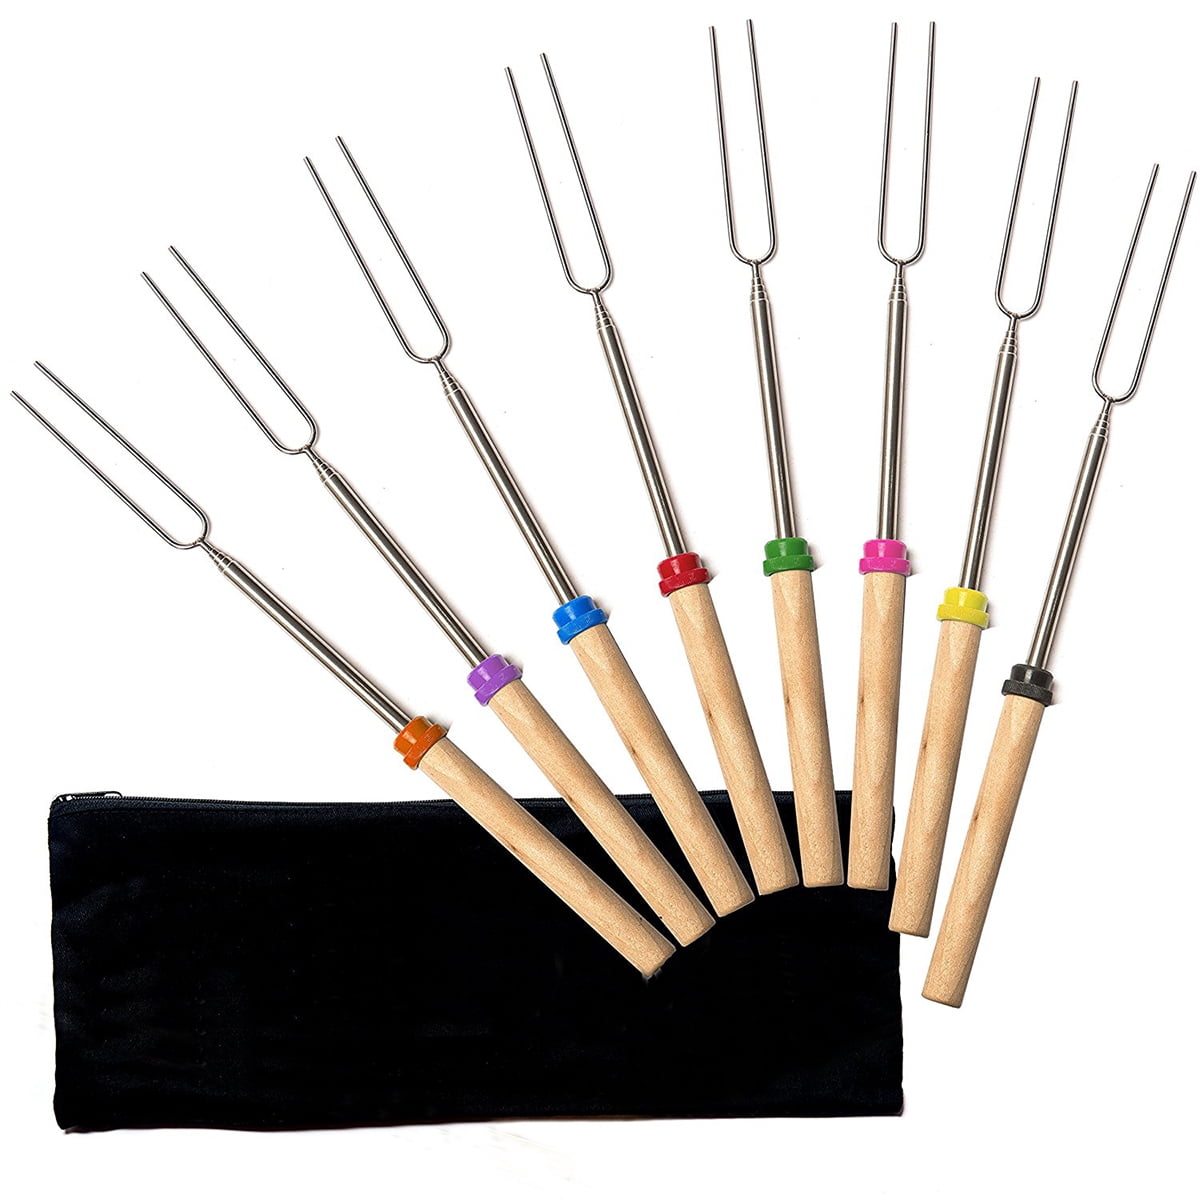 Juhenon Marshmallow Roasting Sticks Smores Skewers for Fire Pit Camping Cookware Fire Stick for Fire Pit Extra Long 32 Inch 12PCS Campfire Roasting Sticks Hot Dog Roasting Sticks 